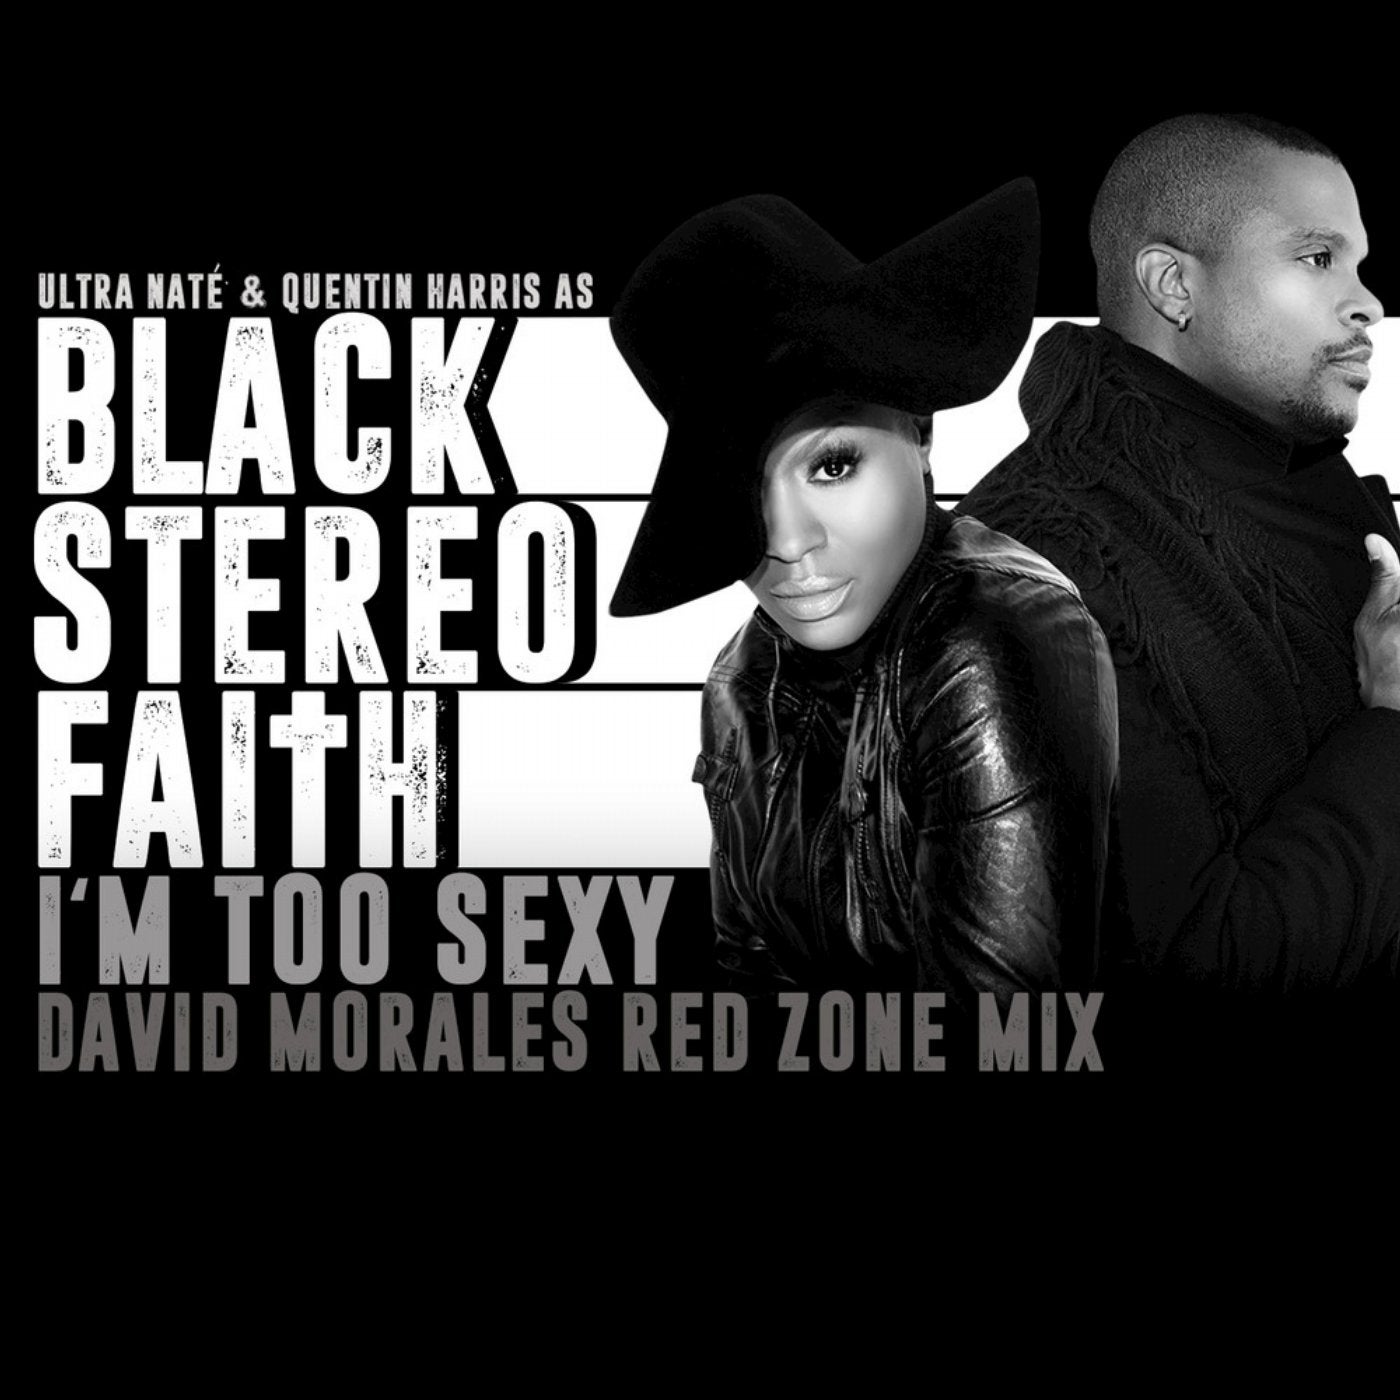 I'm Too Sexy (David Morales Red Zone Mix)